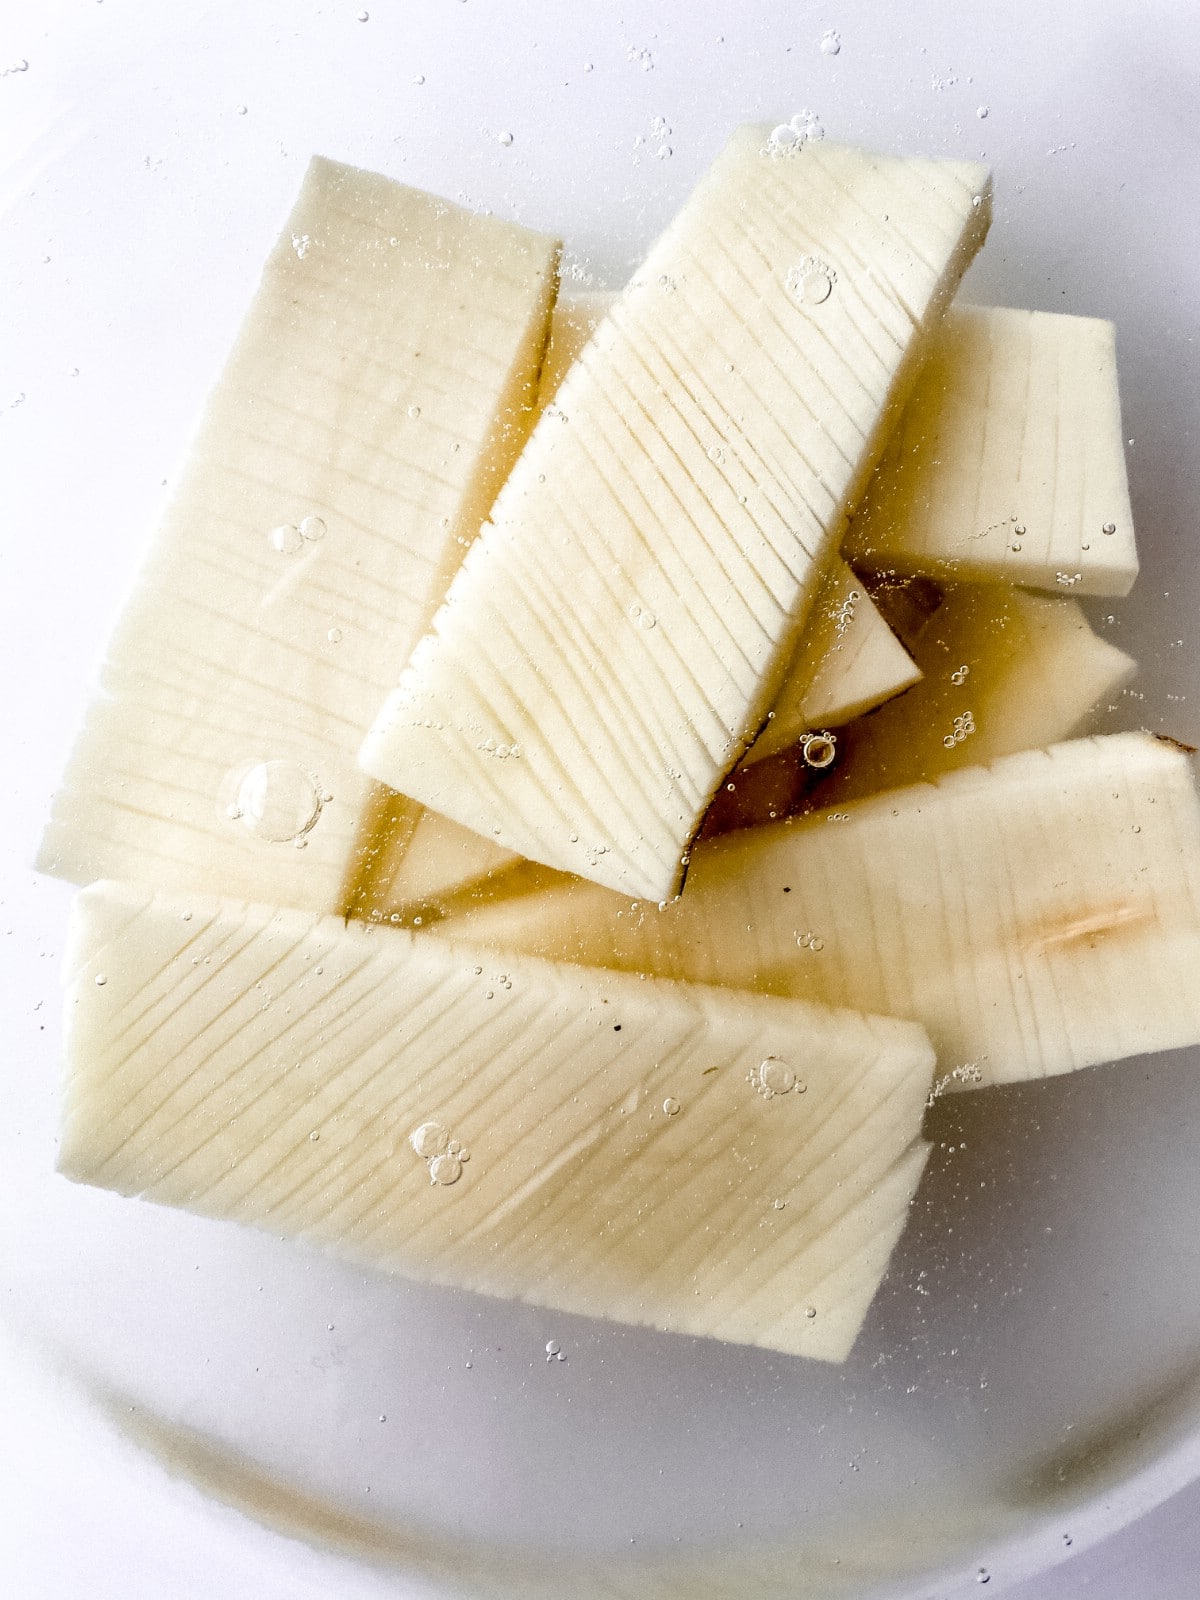 Sliced potatoes in bowl of water